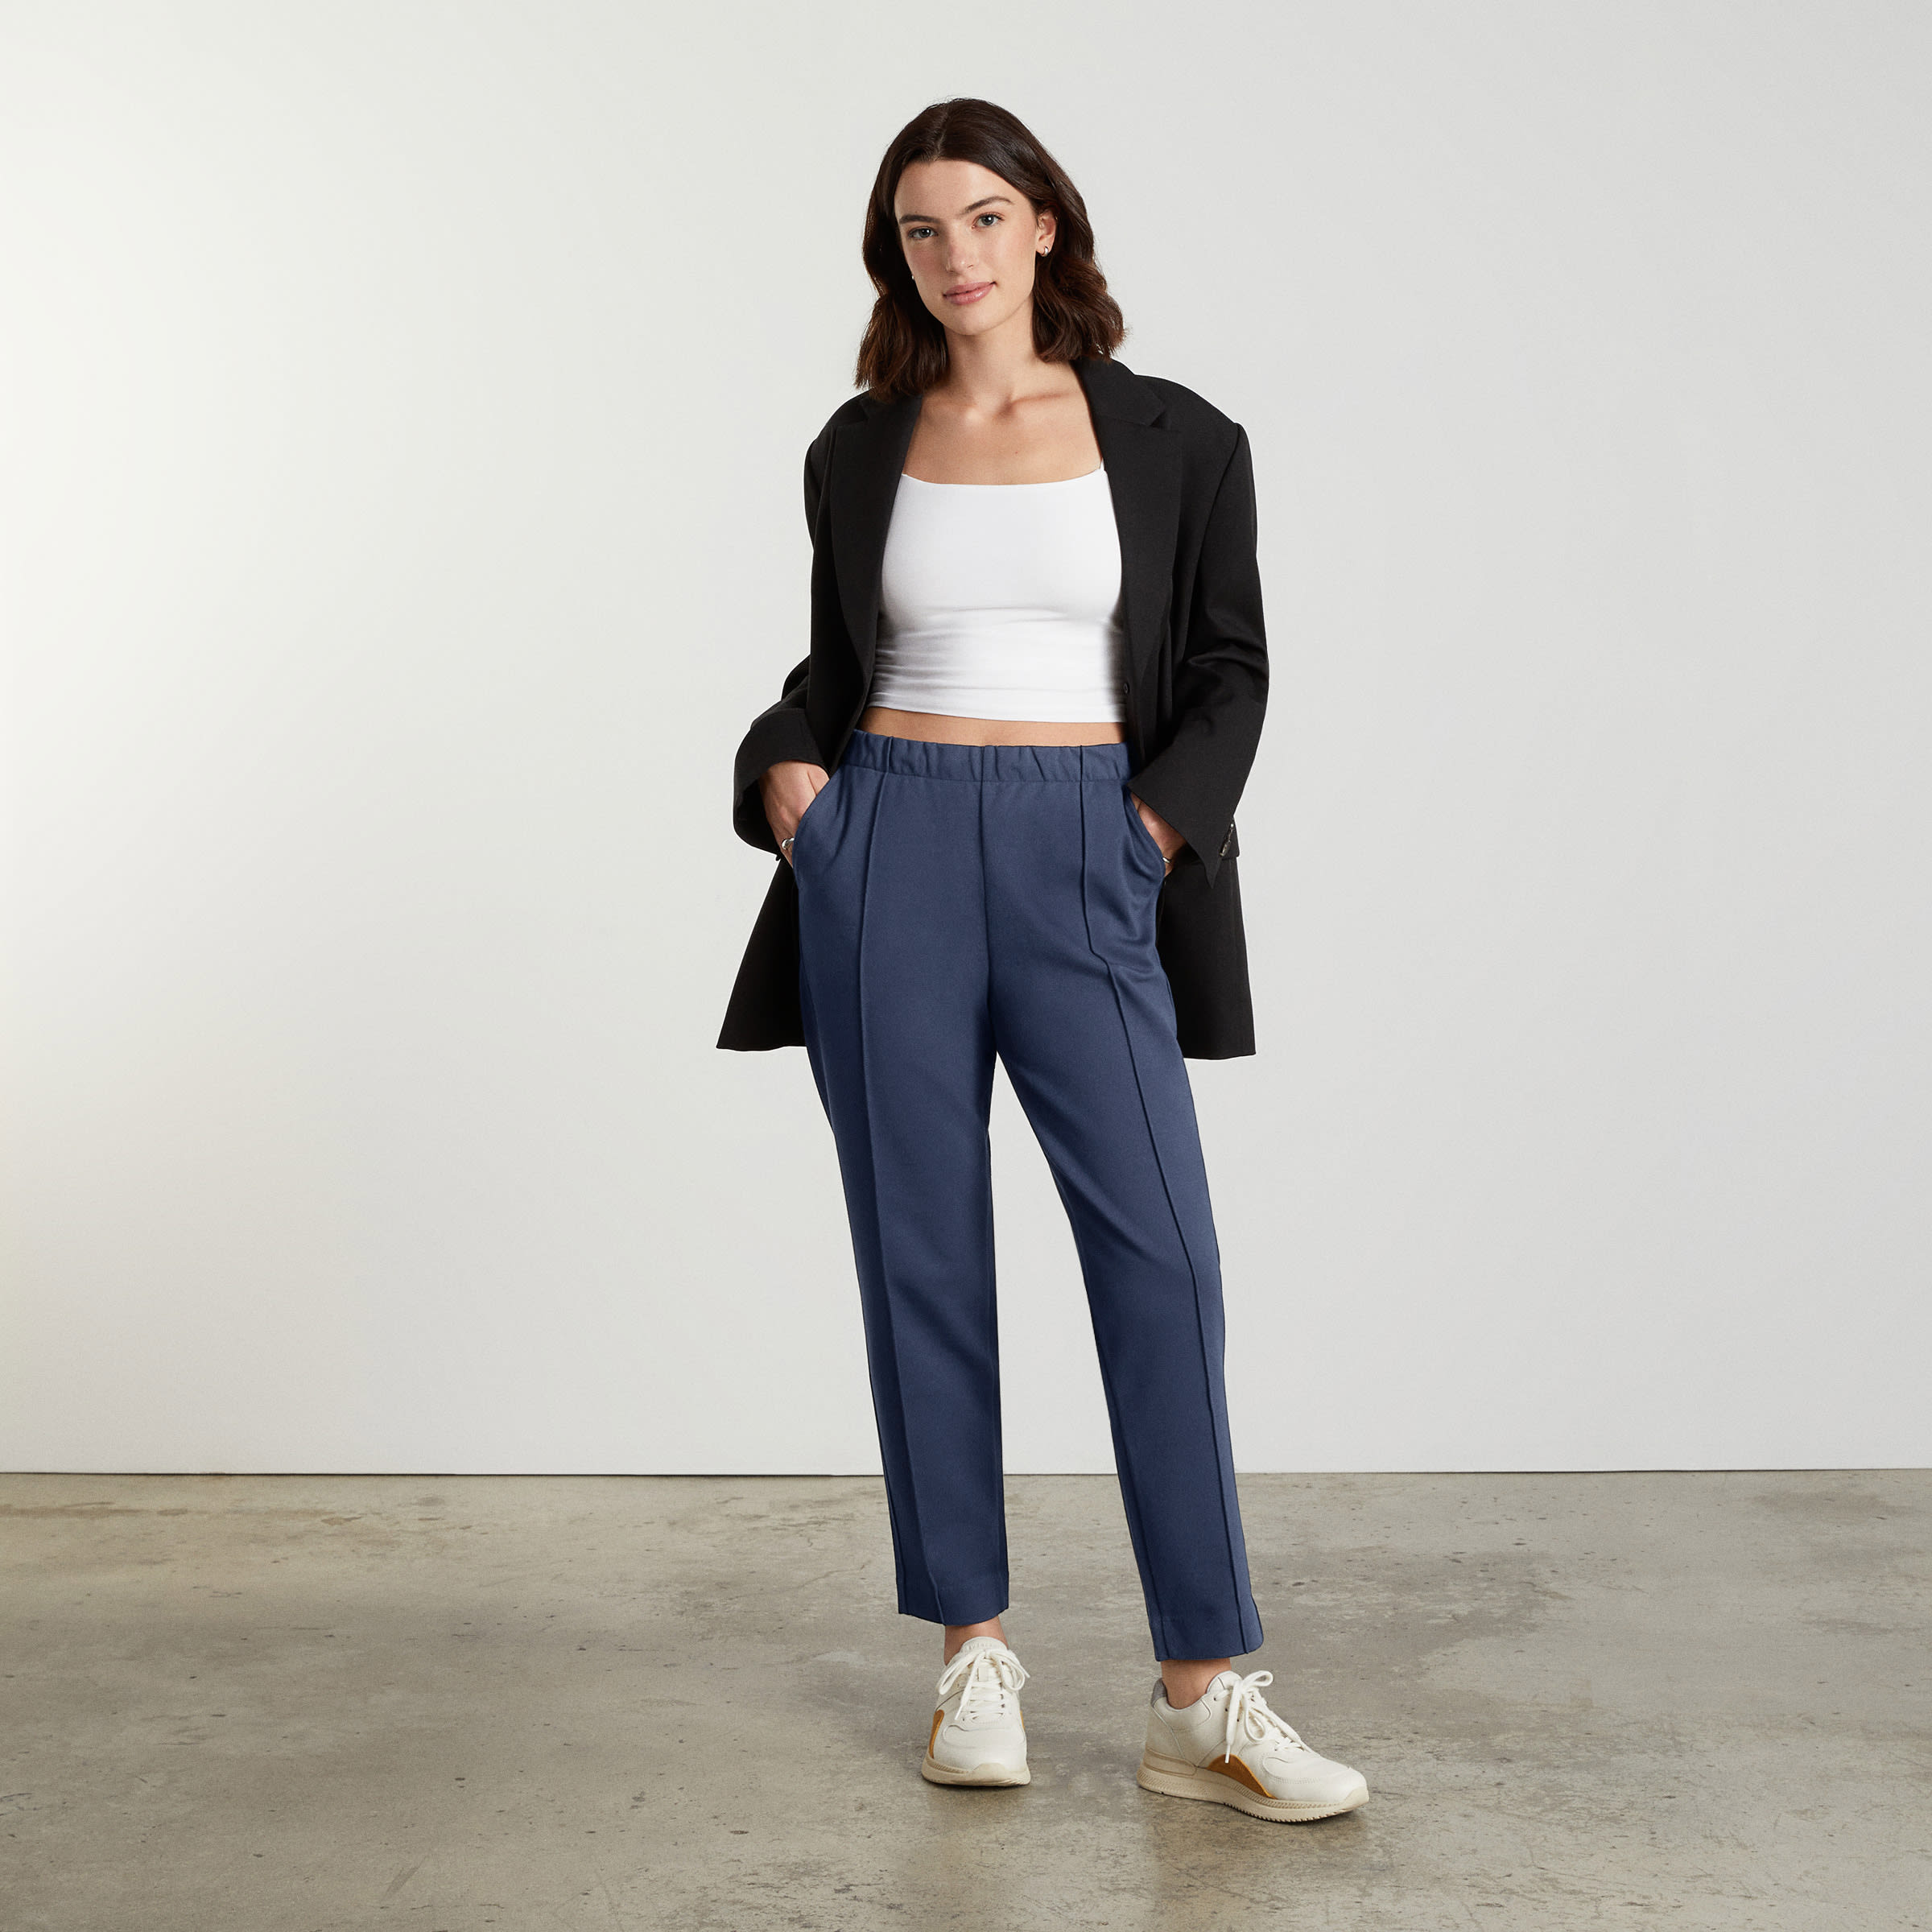 Everlane Utility Arc Pant Review: Are These Barrel Pants Ahead of the Curve?